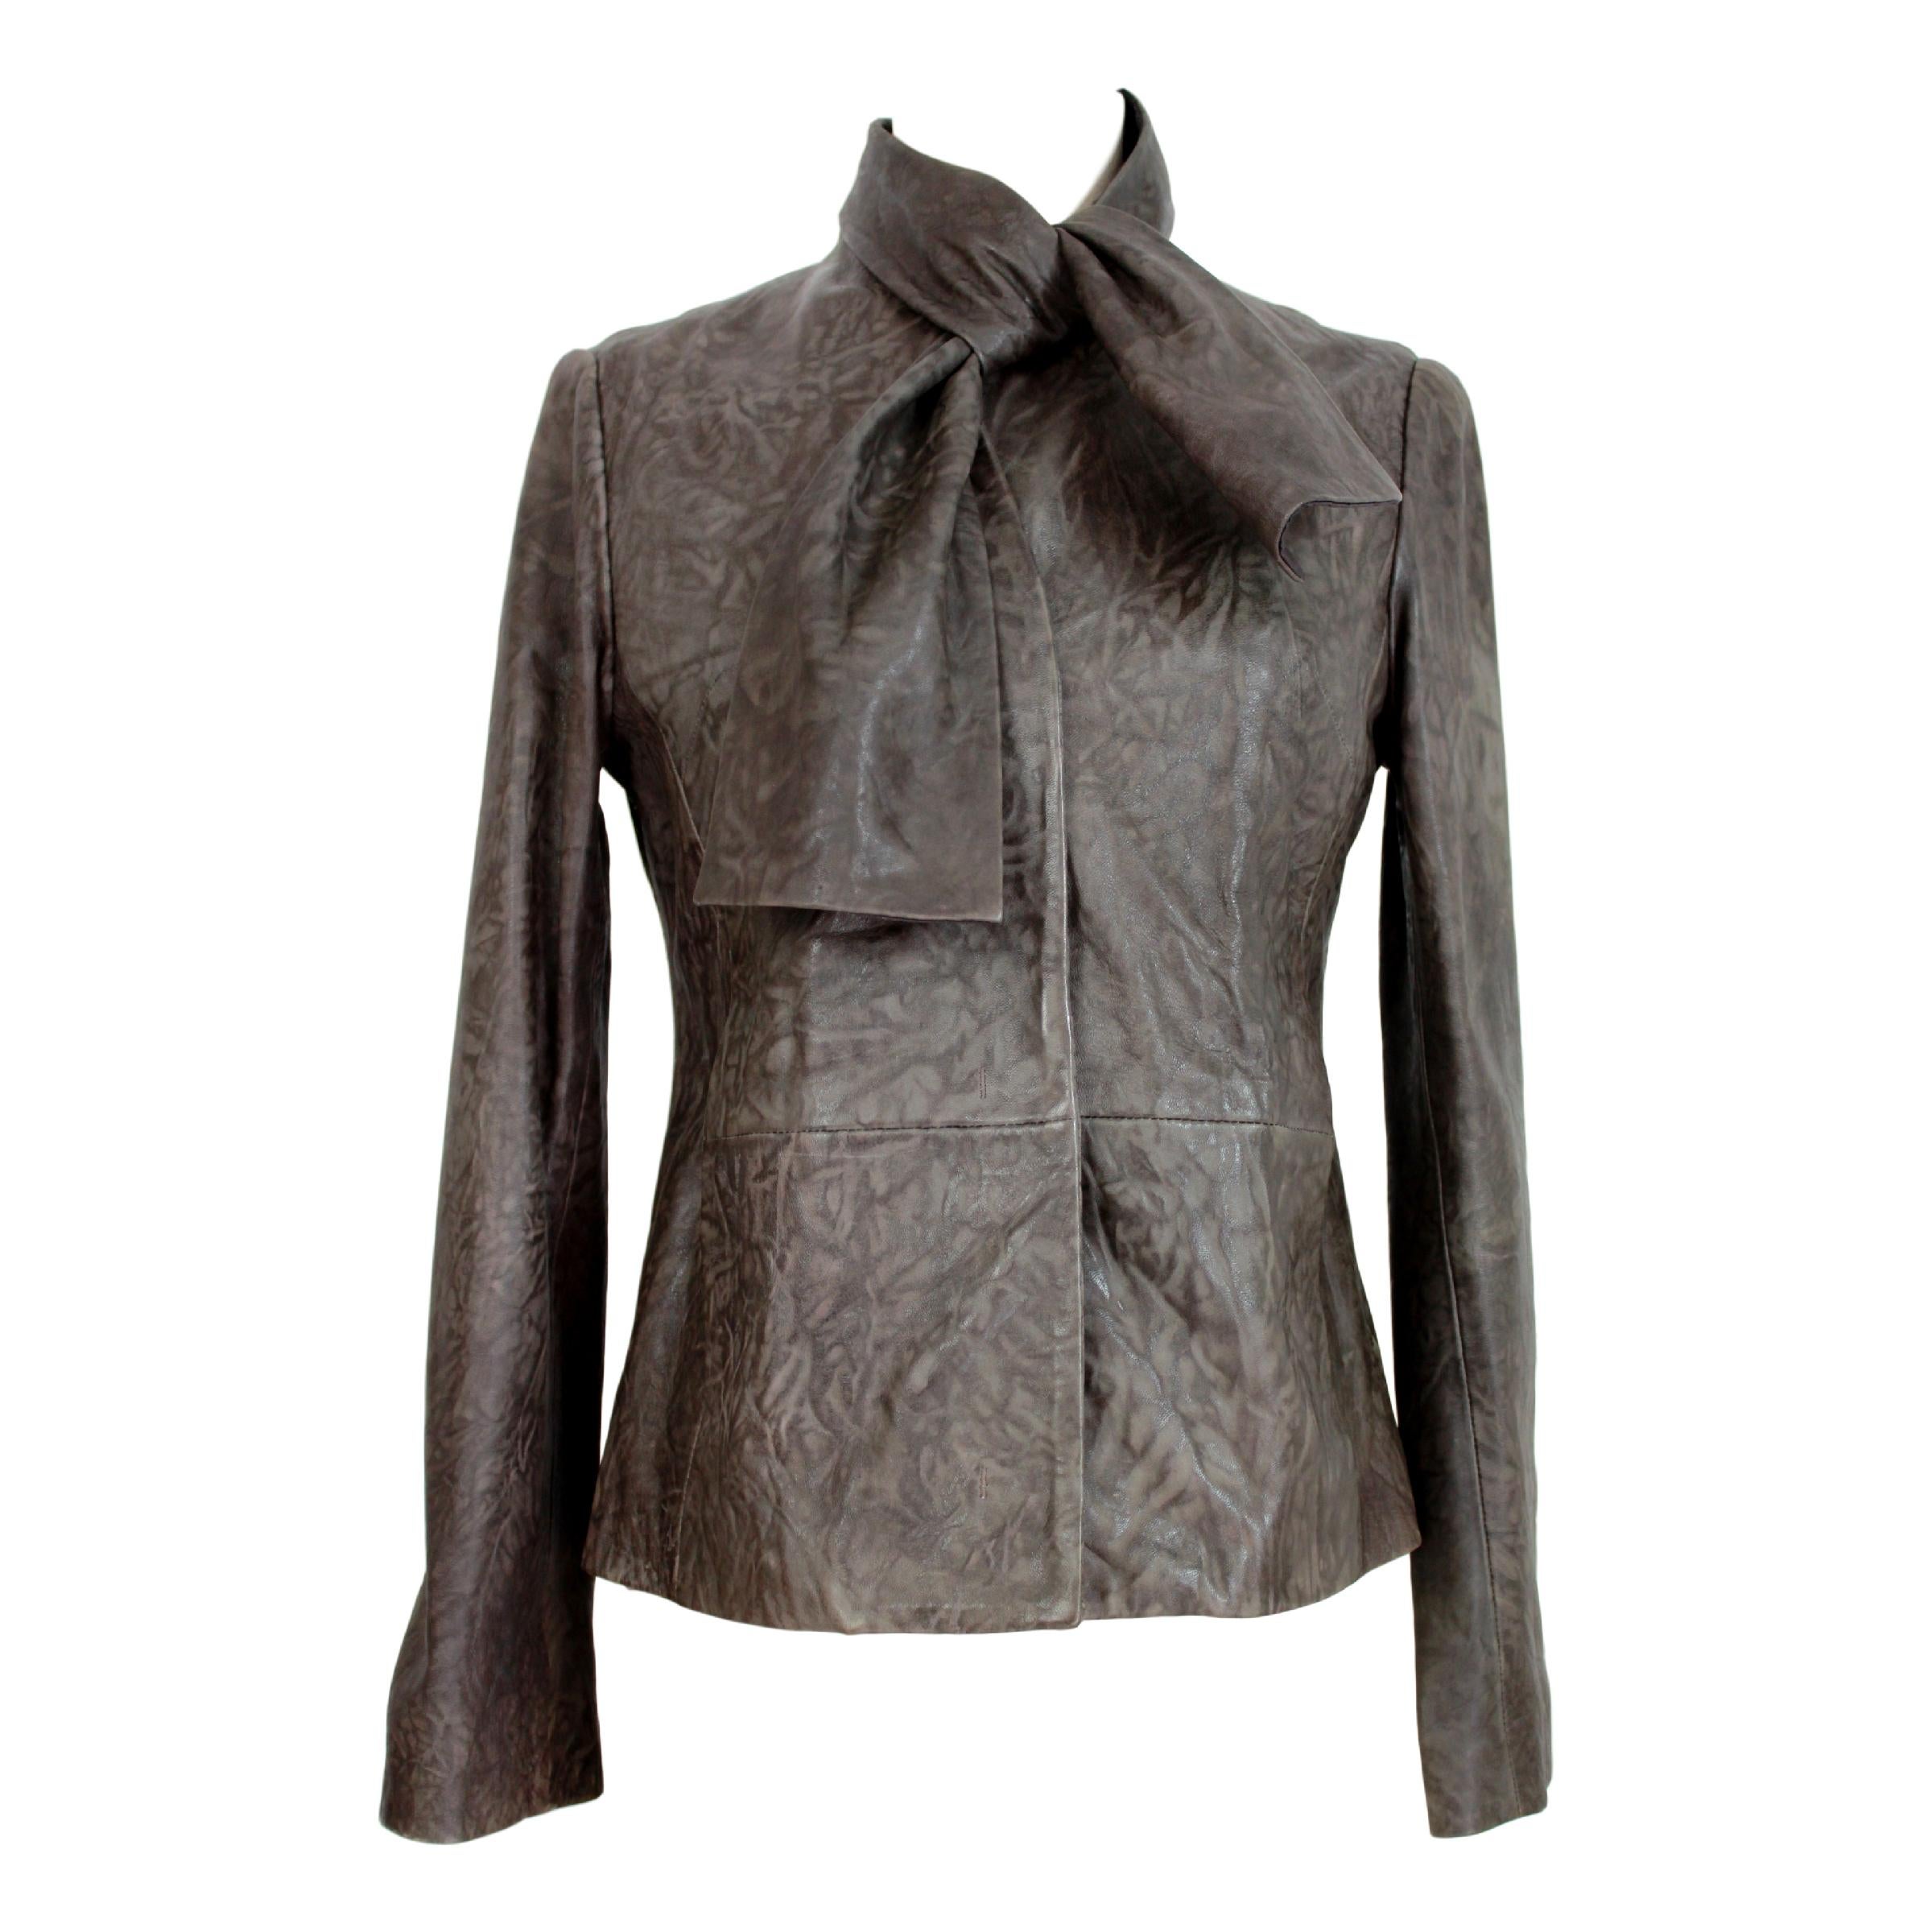 Maison Martin Margiela vintage women's biker jacket. Dark gray color, 100% leather. Internally lined. Scarf collar, removable. Clip button closure. 90s. Made in India. 

Size: 40 It 6 Us 8 Uk 

Shoulder: 40 cm 
Bust / Chest: 48 cm 
Sleeve: 61